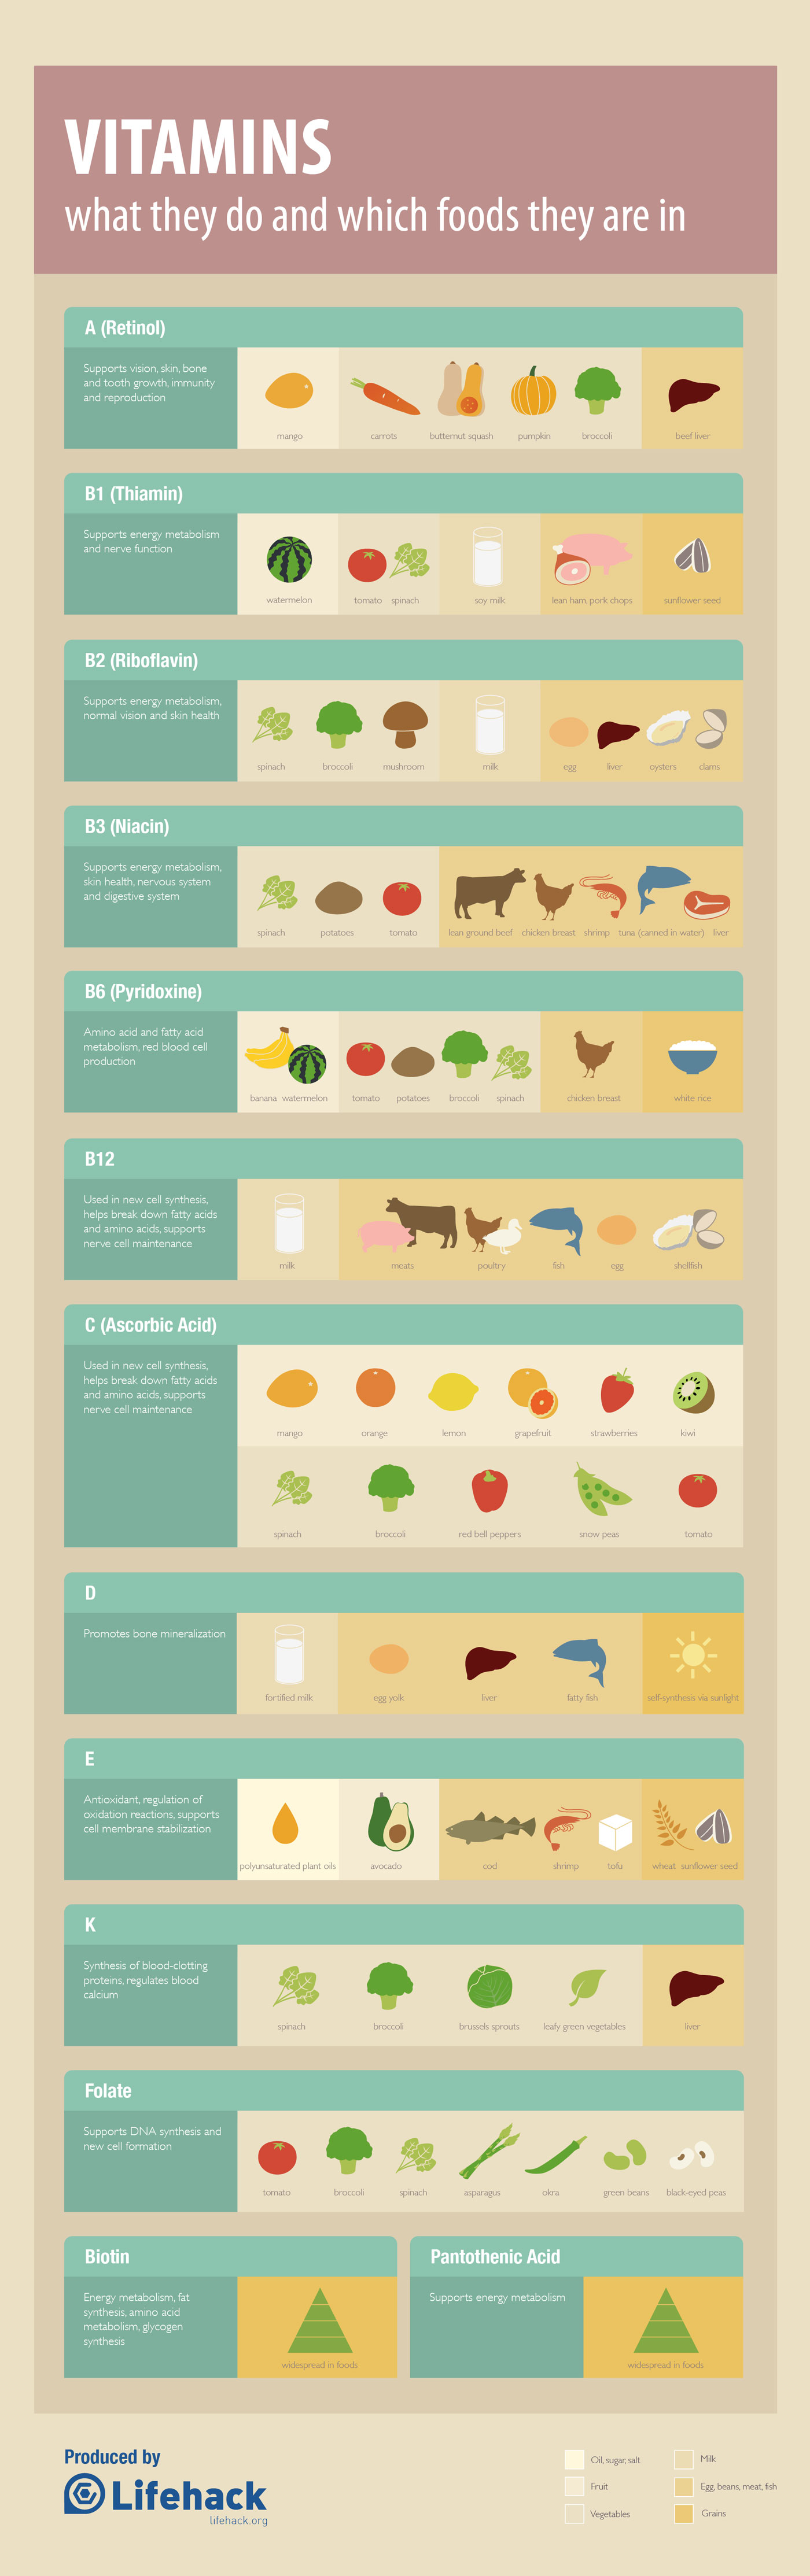 12 Vitamins' Sources Infographic